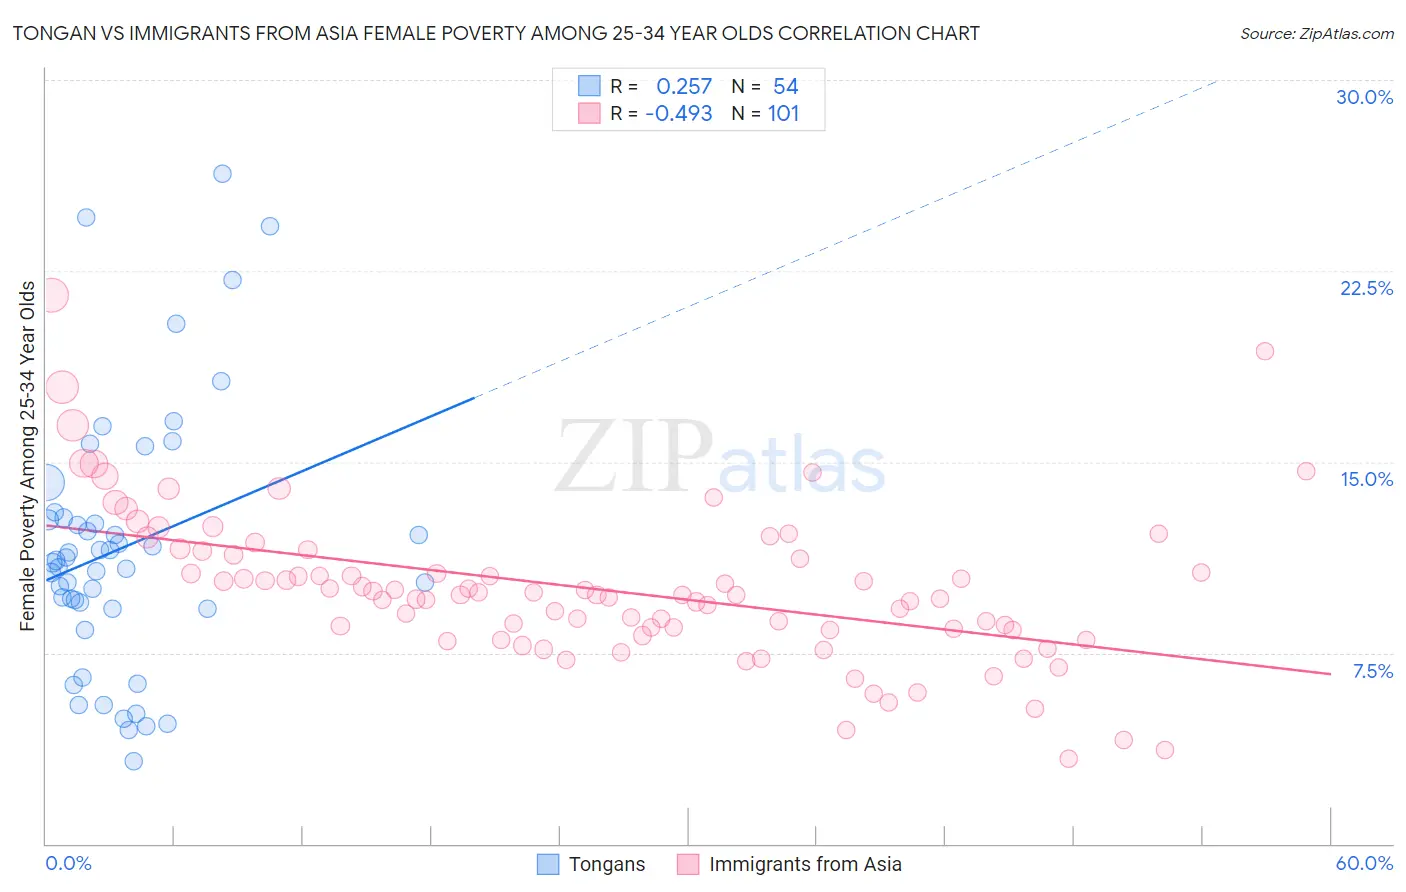 Tongan vs Immigrants from Asia Female Poverty Among 25-34 Year Olds